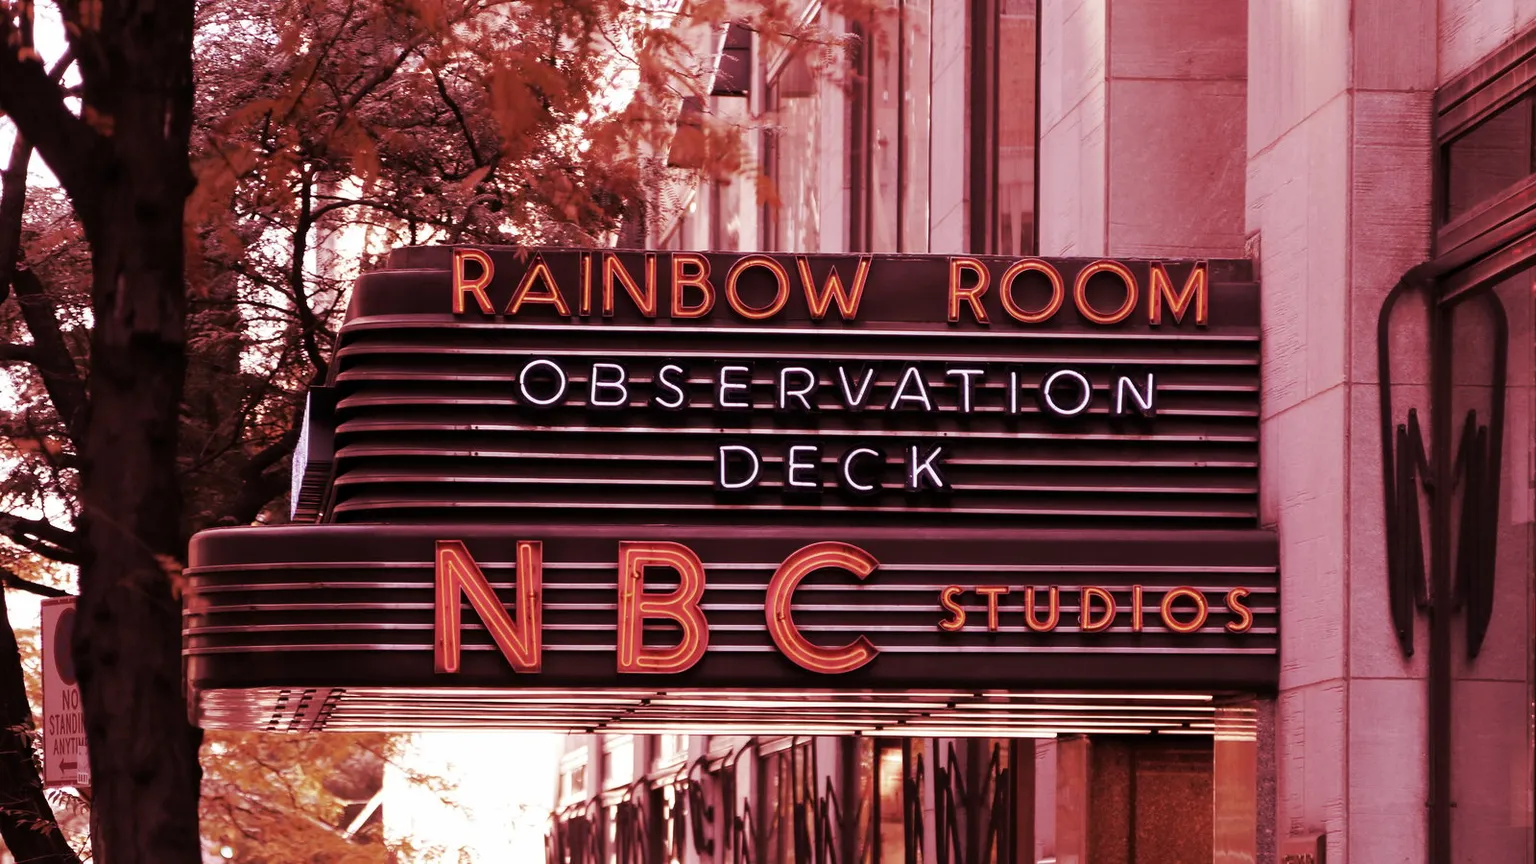 World headquarters for NBC News, the Saturday Night Live studios and the Rainbow Room. Image: Shutterstock